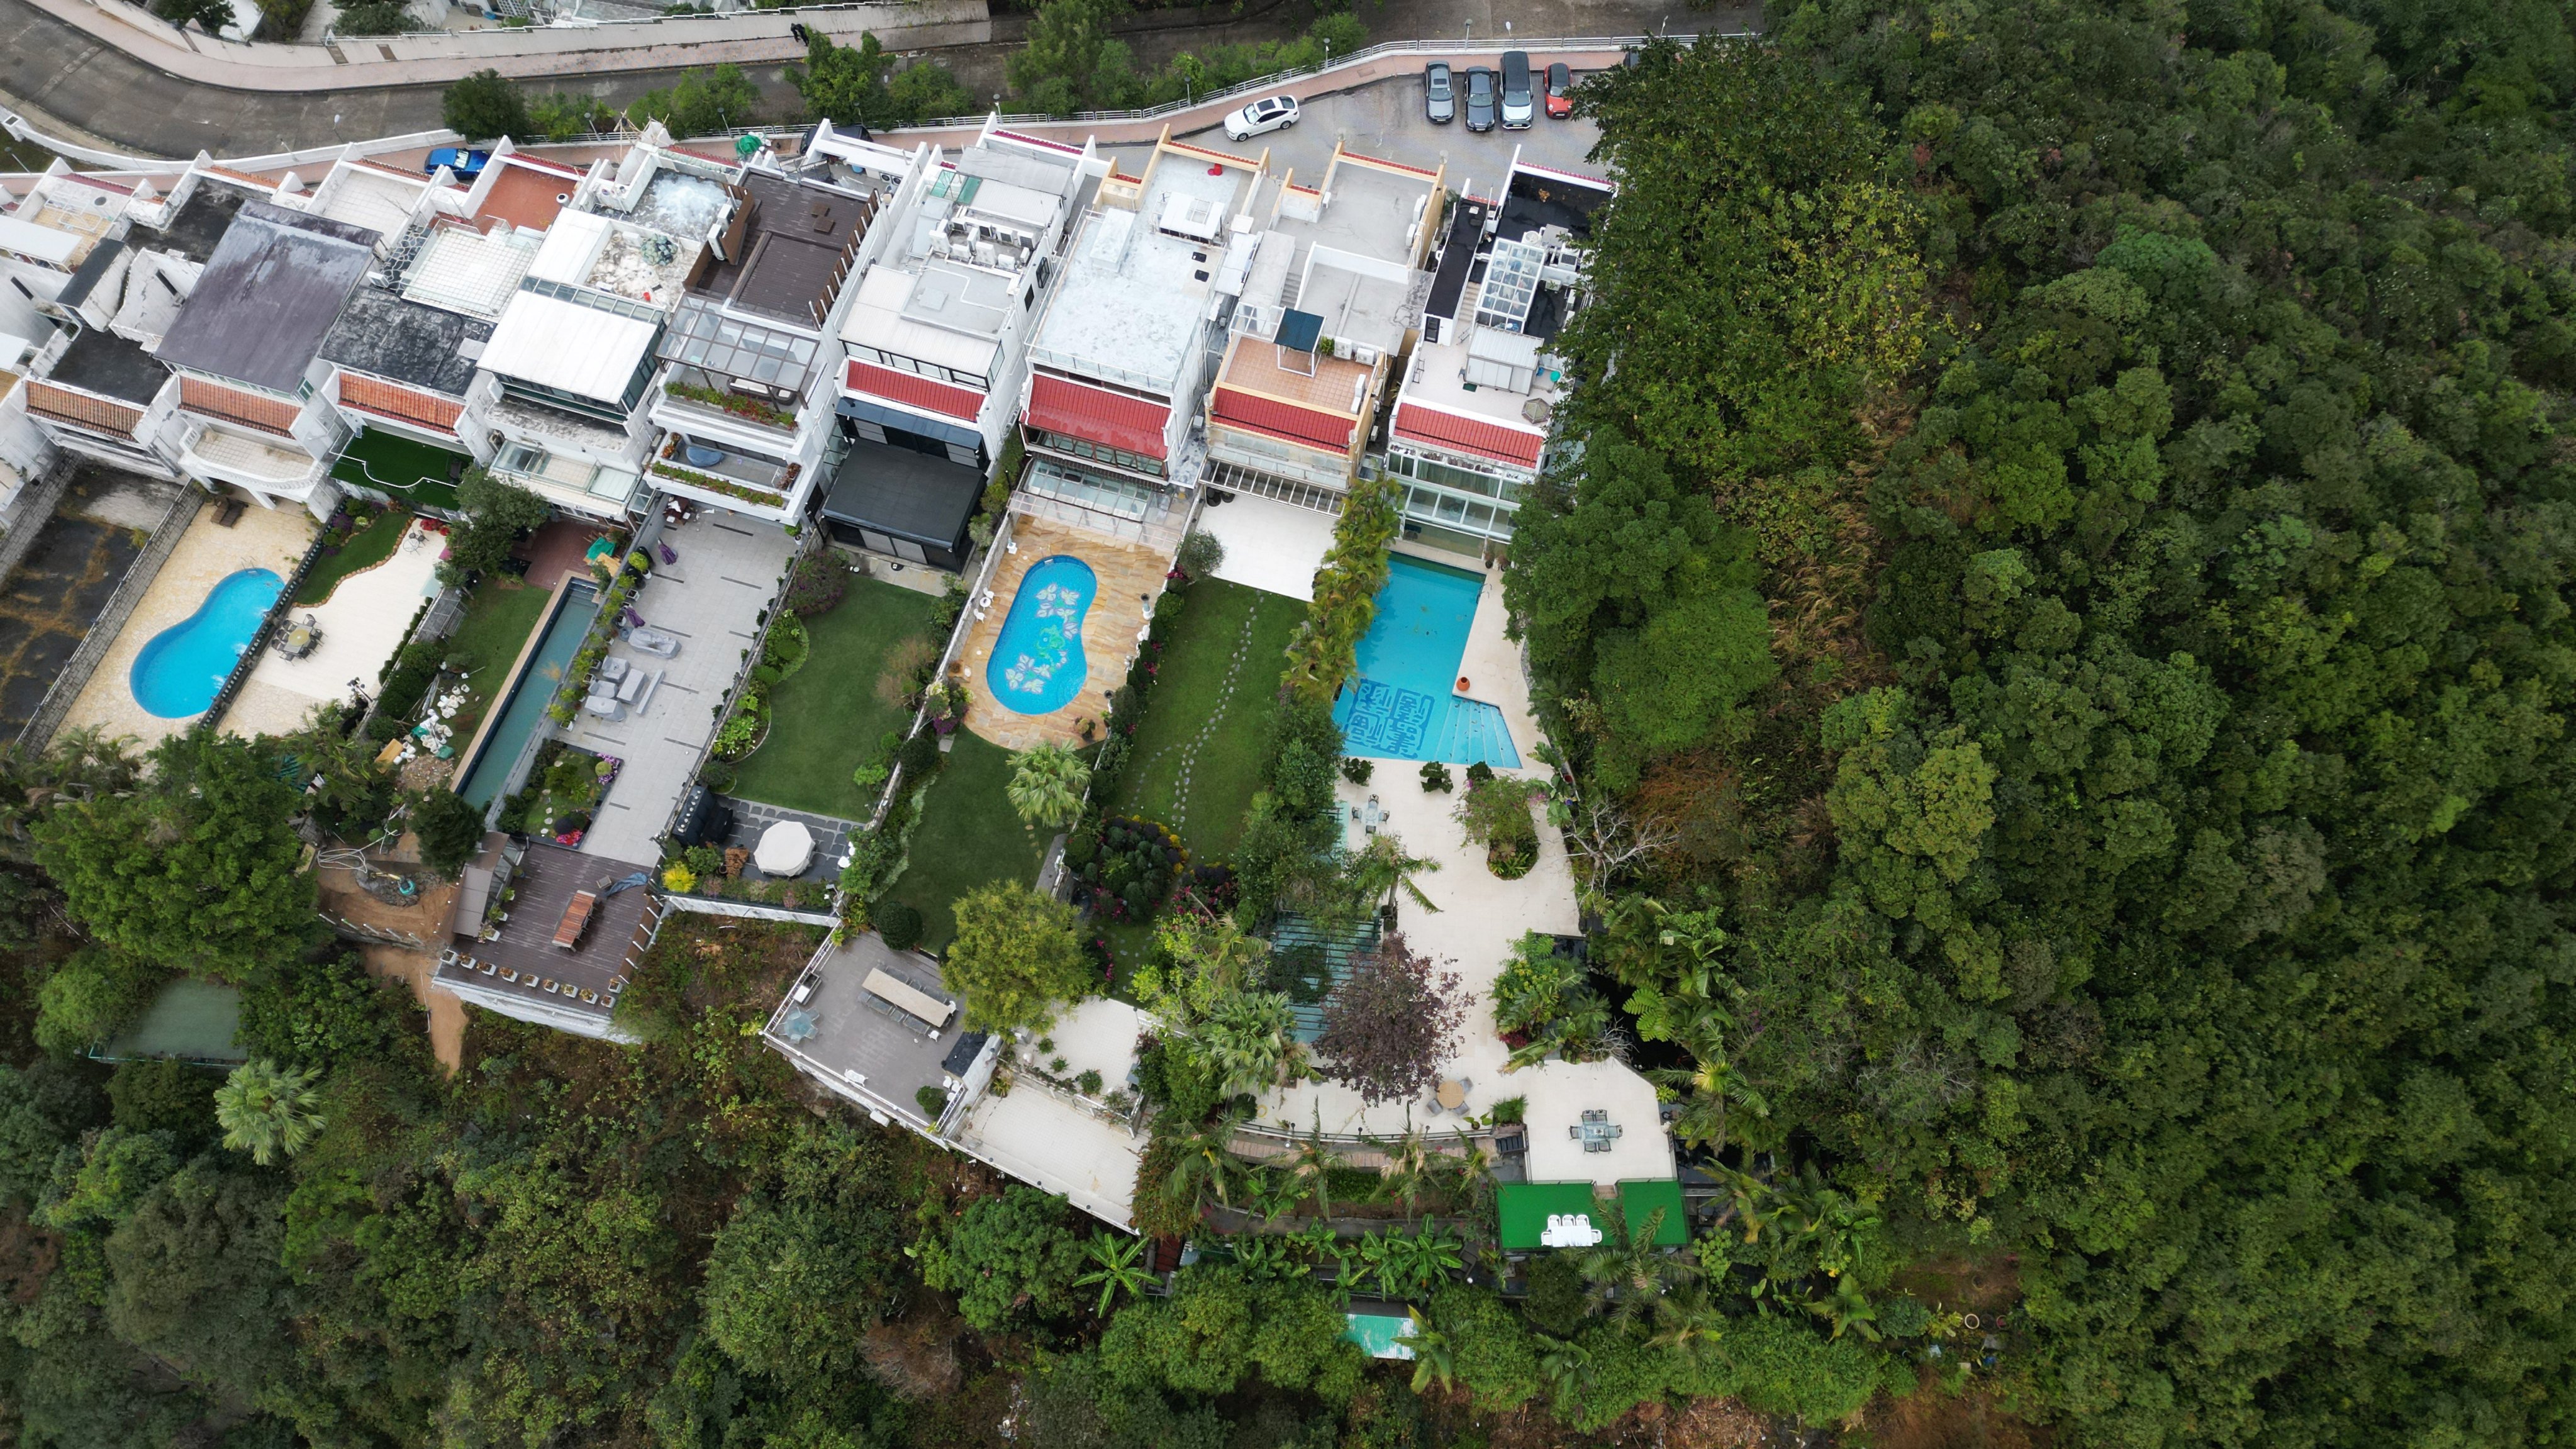 An aerial view of Flamingo Garden Block B in Clear Water Bay, where the Post has uncovered suspected unauthorised structures, seen on January 23. The prevalence of illegal structures going noticed but unpunished risks undermining faith in the rule of law in Hong Kong. Photo: May Tse